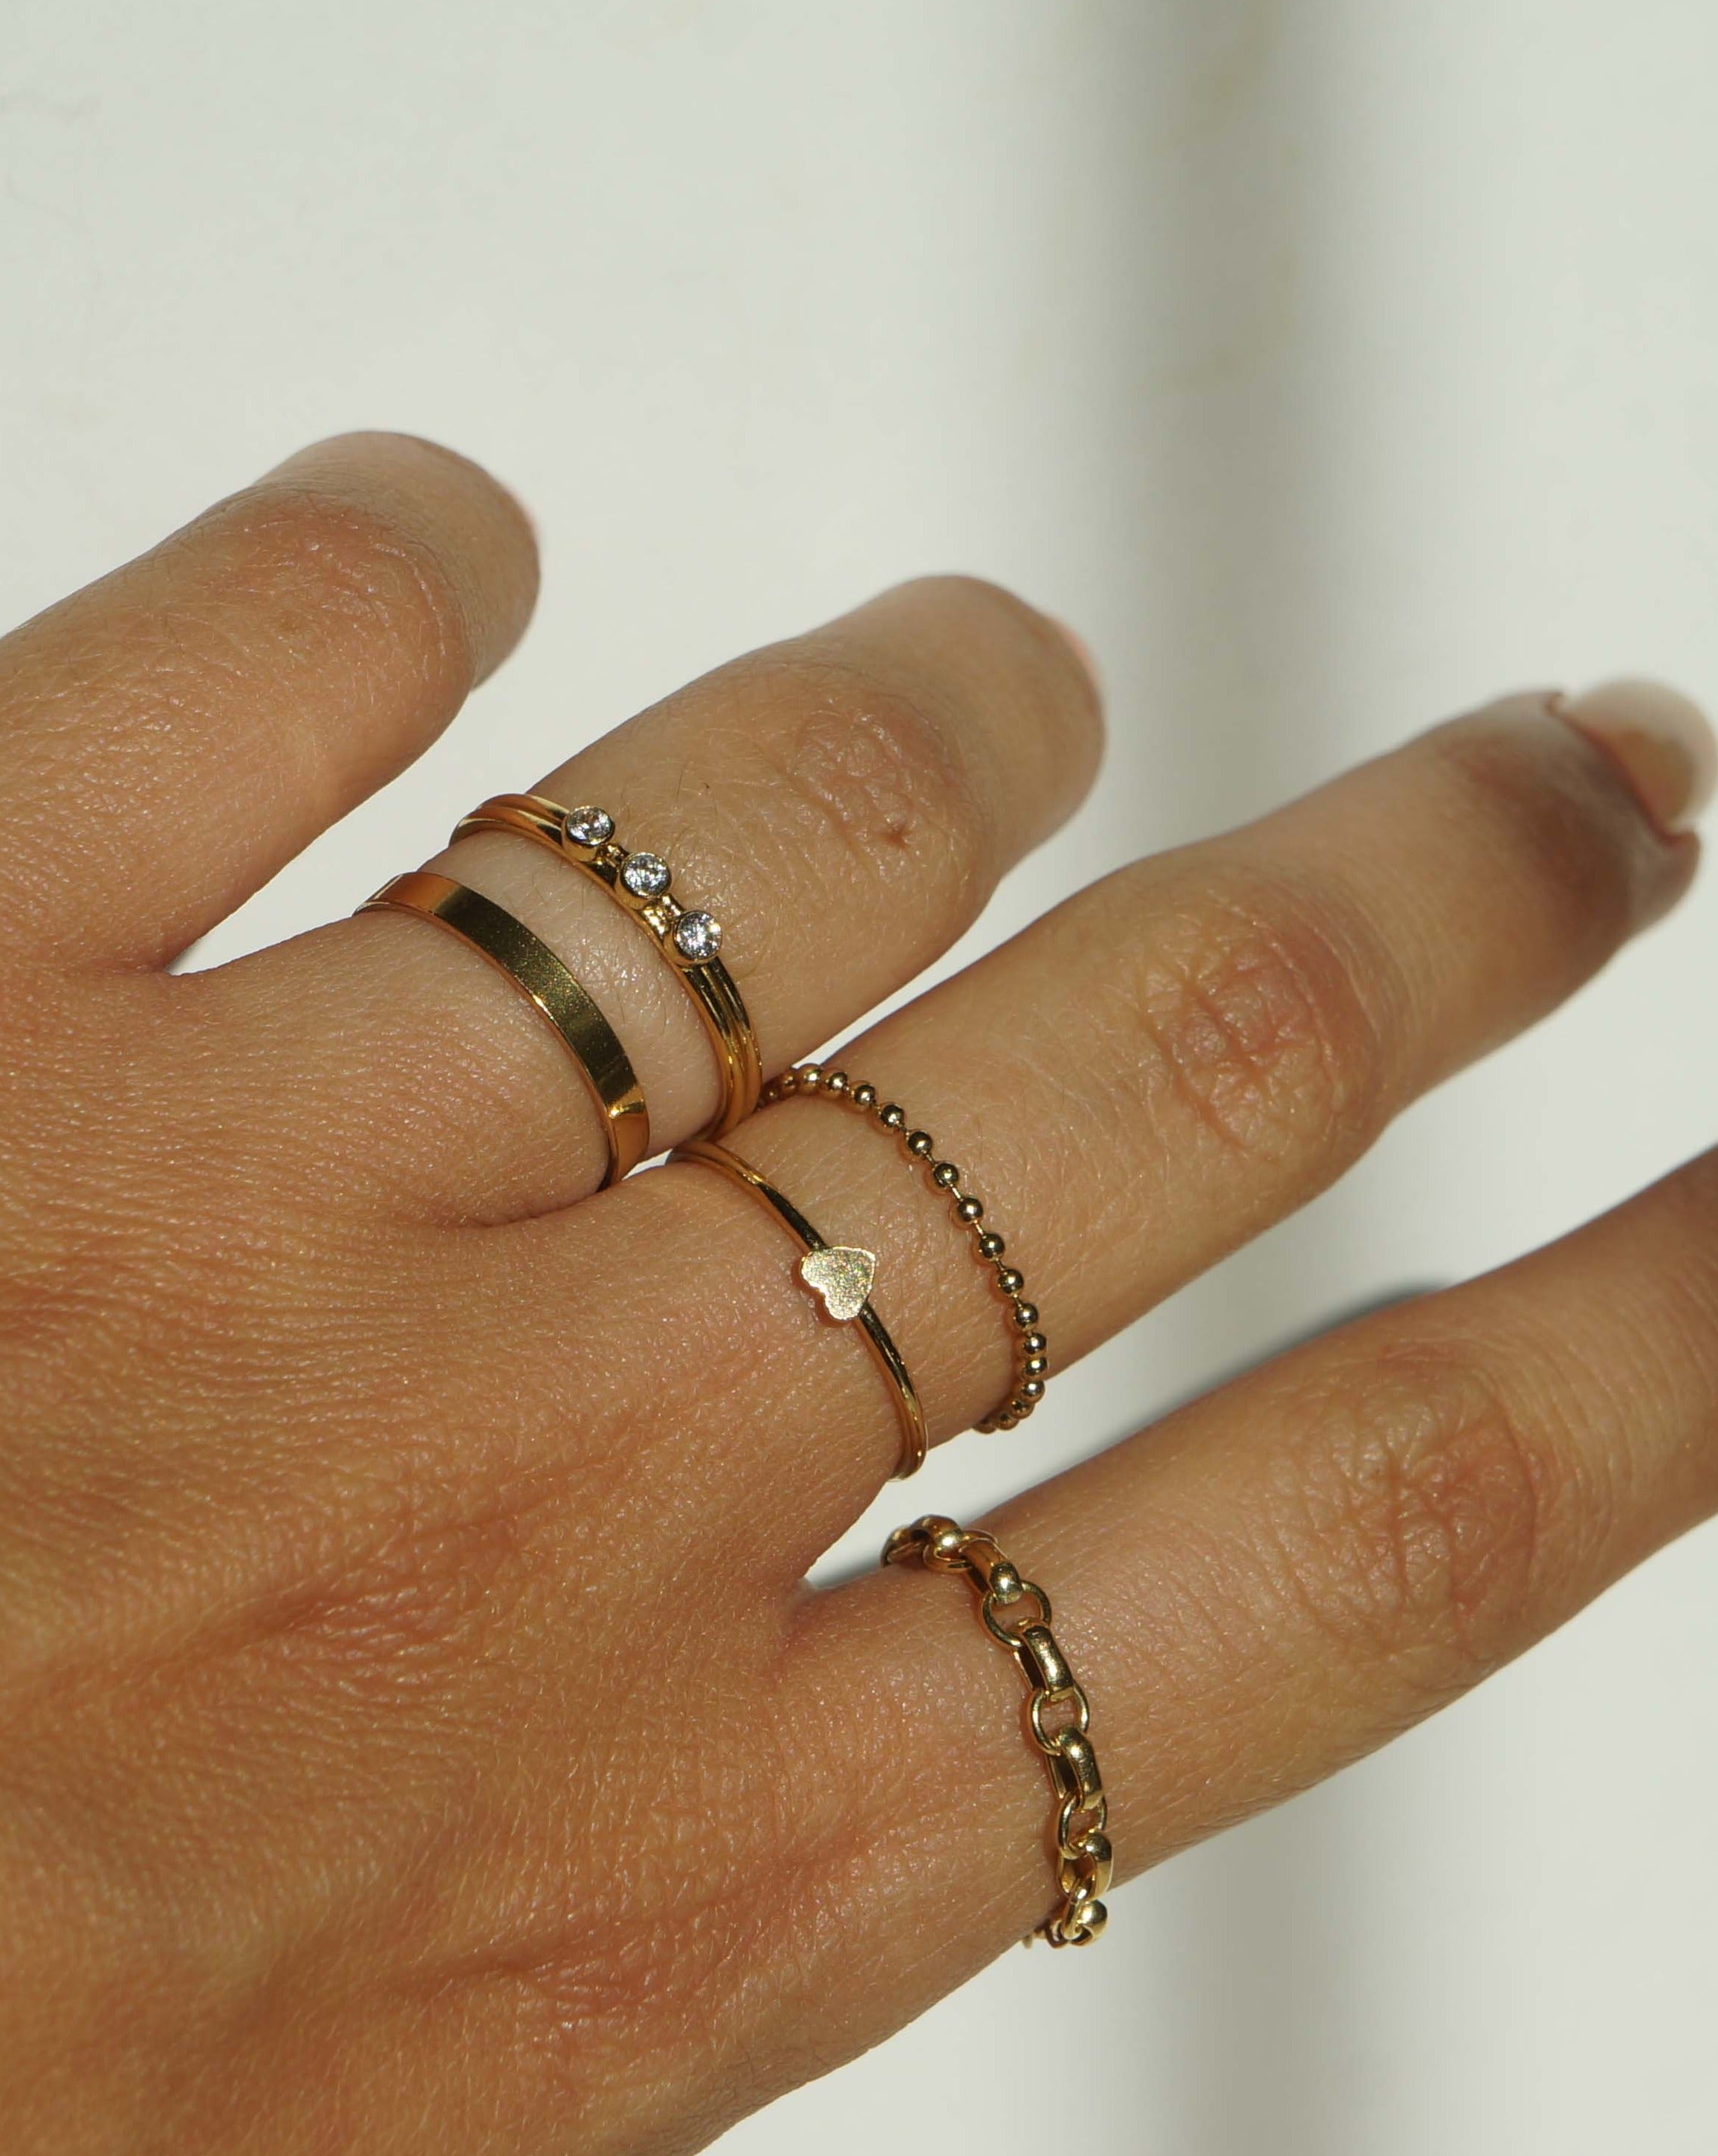 Tres Dia Ring by KOZAKH. A 1mm double band, crafted in 14K Gold Filled, featuring three 2mm Cubic Zirconias.